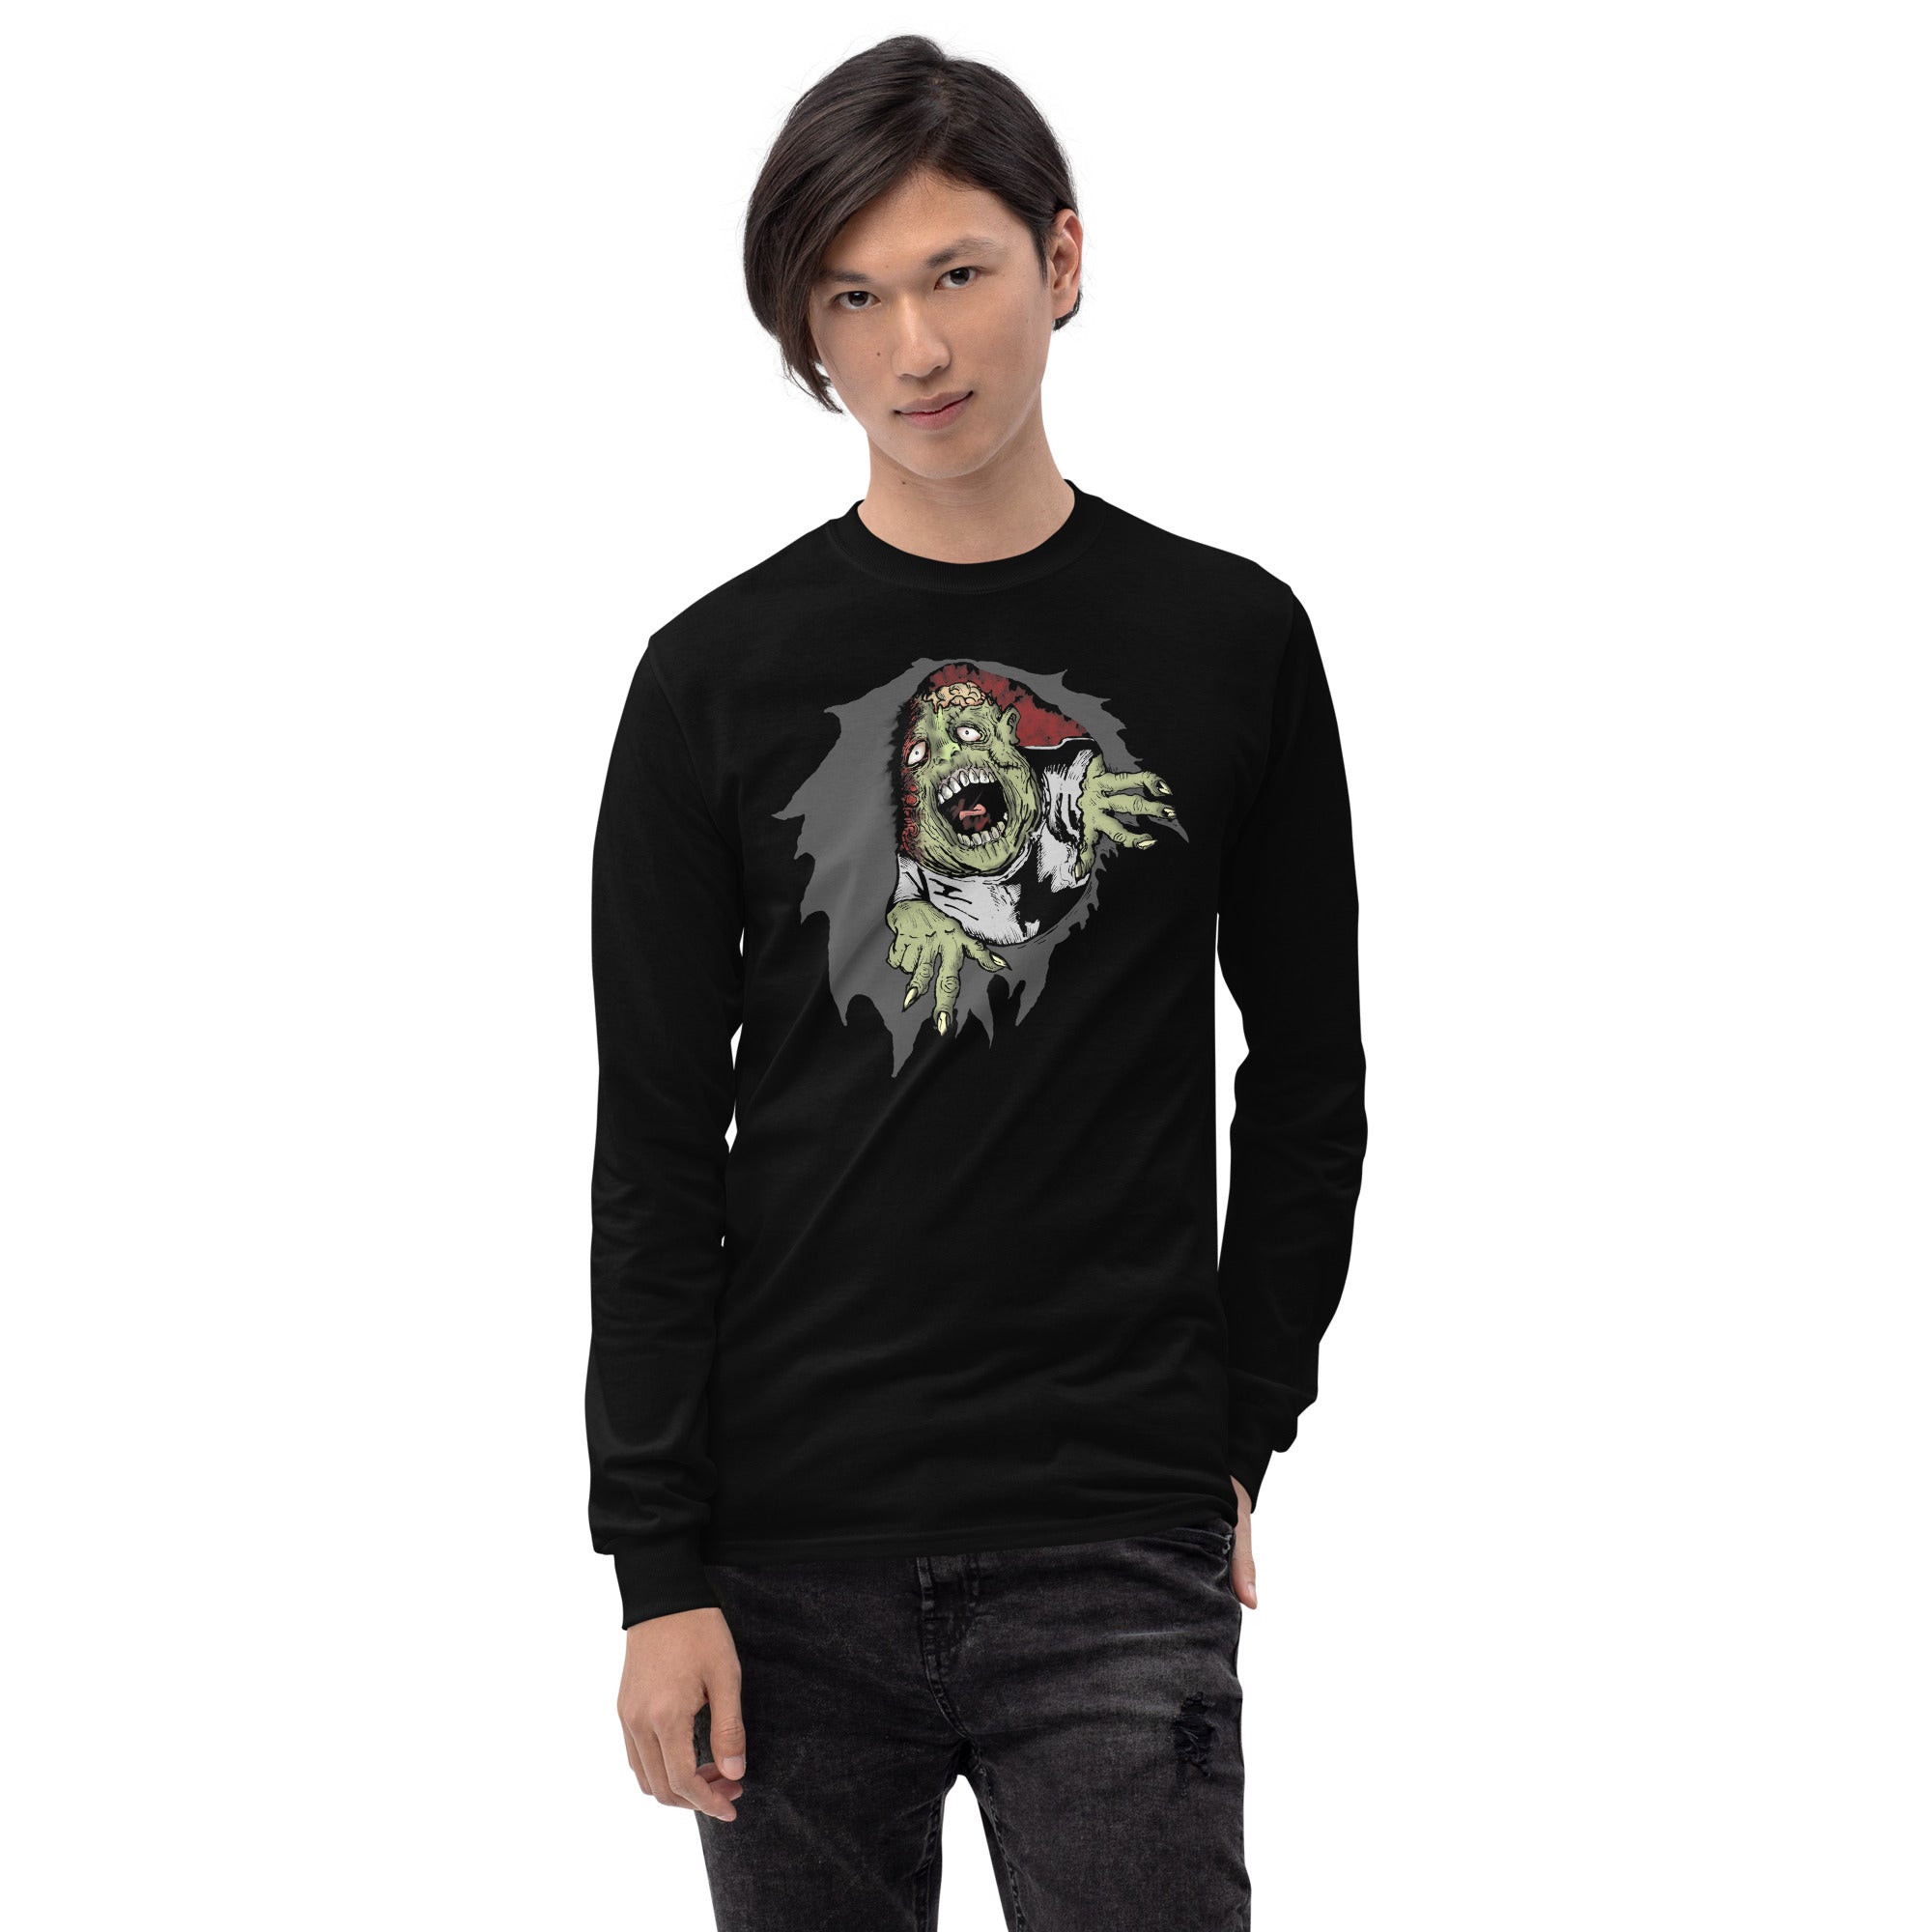 Flesh Eating Zombie Ripping Through Chest Horror Long Sleeve Shirt - Edge of Life Designs